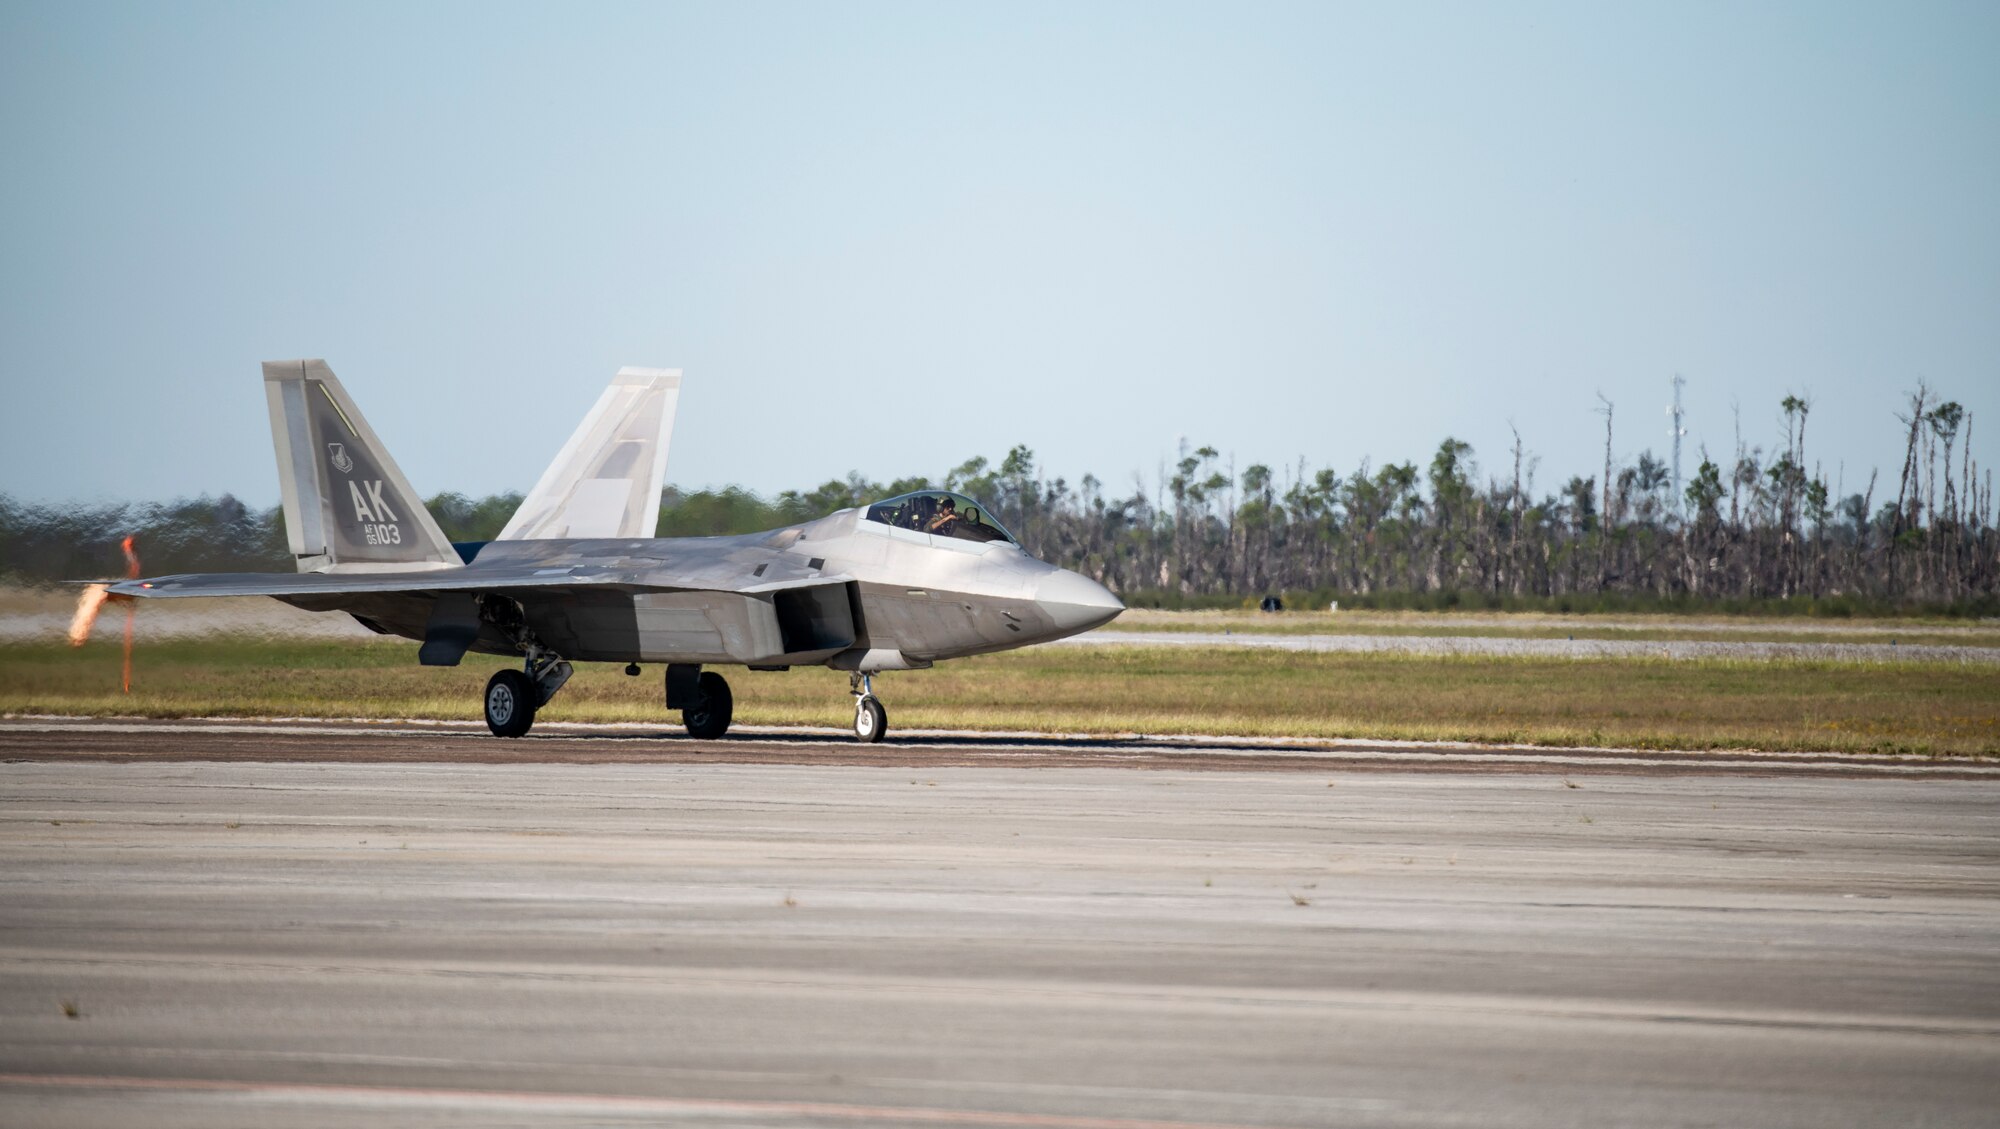 An F-22 Raptor assigned to the 90th Fighter Squadron from Joint Base Elmendorf-Richardson, Alaska, lands at Tyndall Air Force Base, Florida, Oct. 30, 2020. The aircraft arrived to participate in a large scale air-to-air combat exercise known as Checkered Flag. (U.S. Air Force photo by Airman 1st Class Tiffany Price)